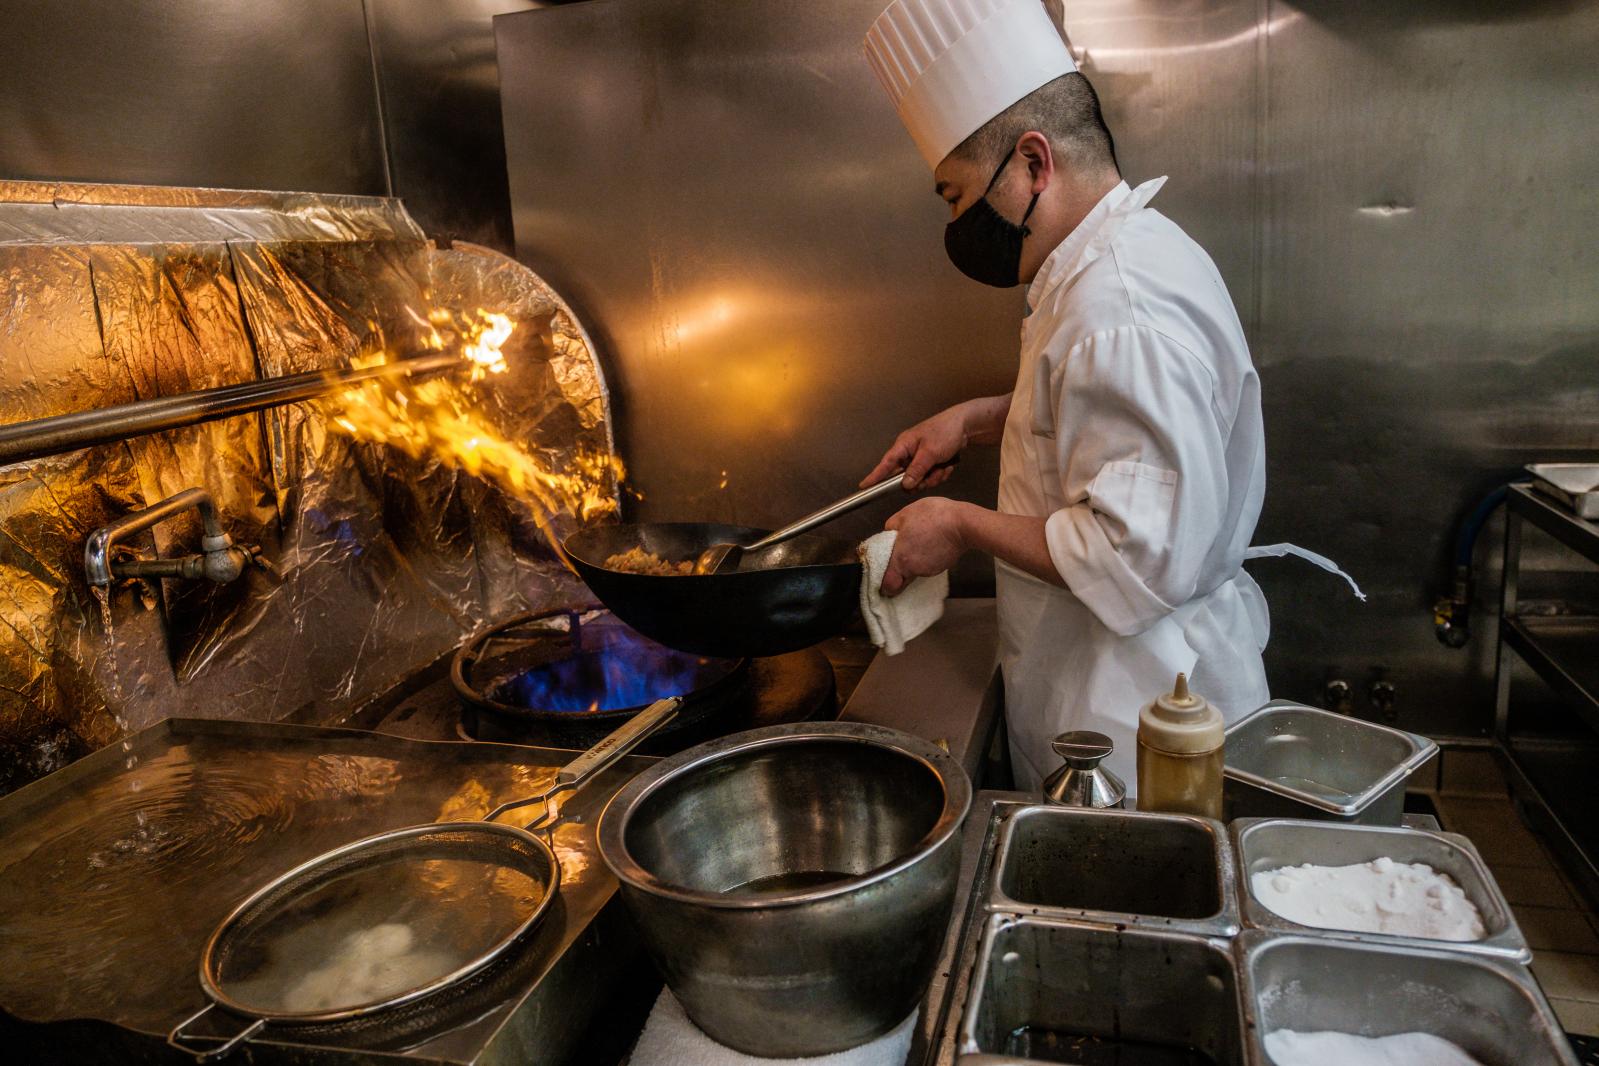 Image from FOOD/DRINK - Chef Chao Hua Lei prepares a dish using a gas stove at...